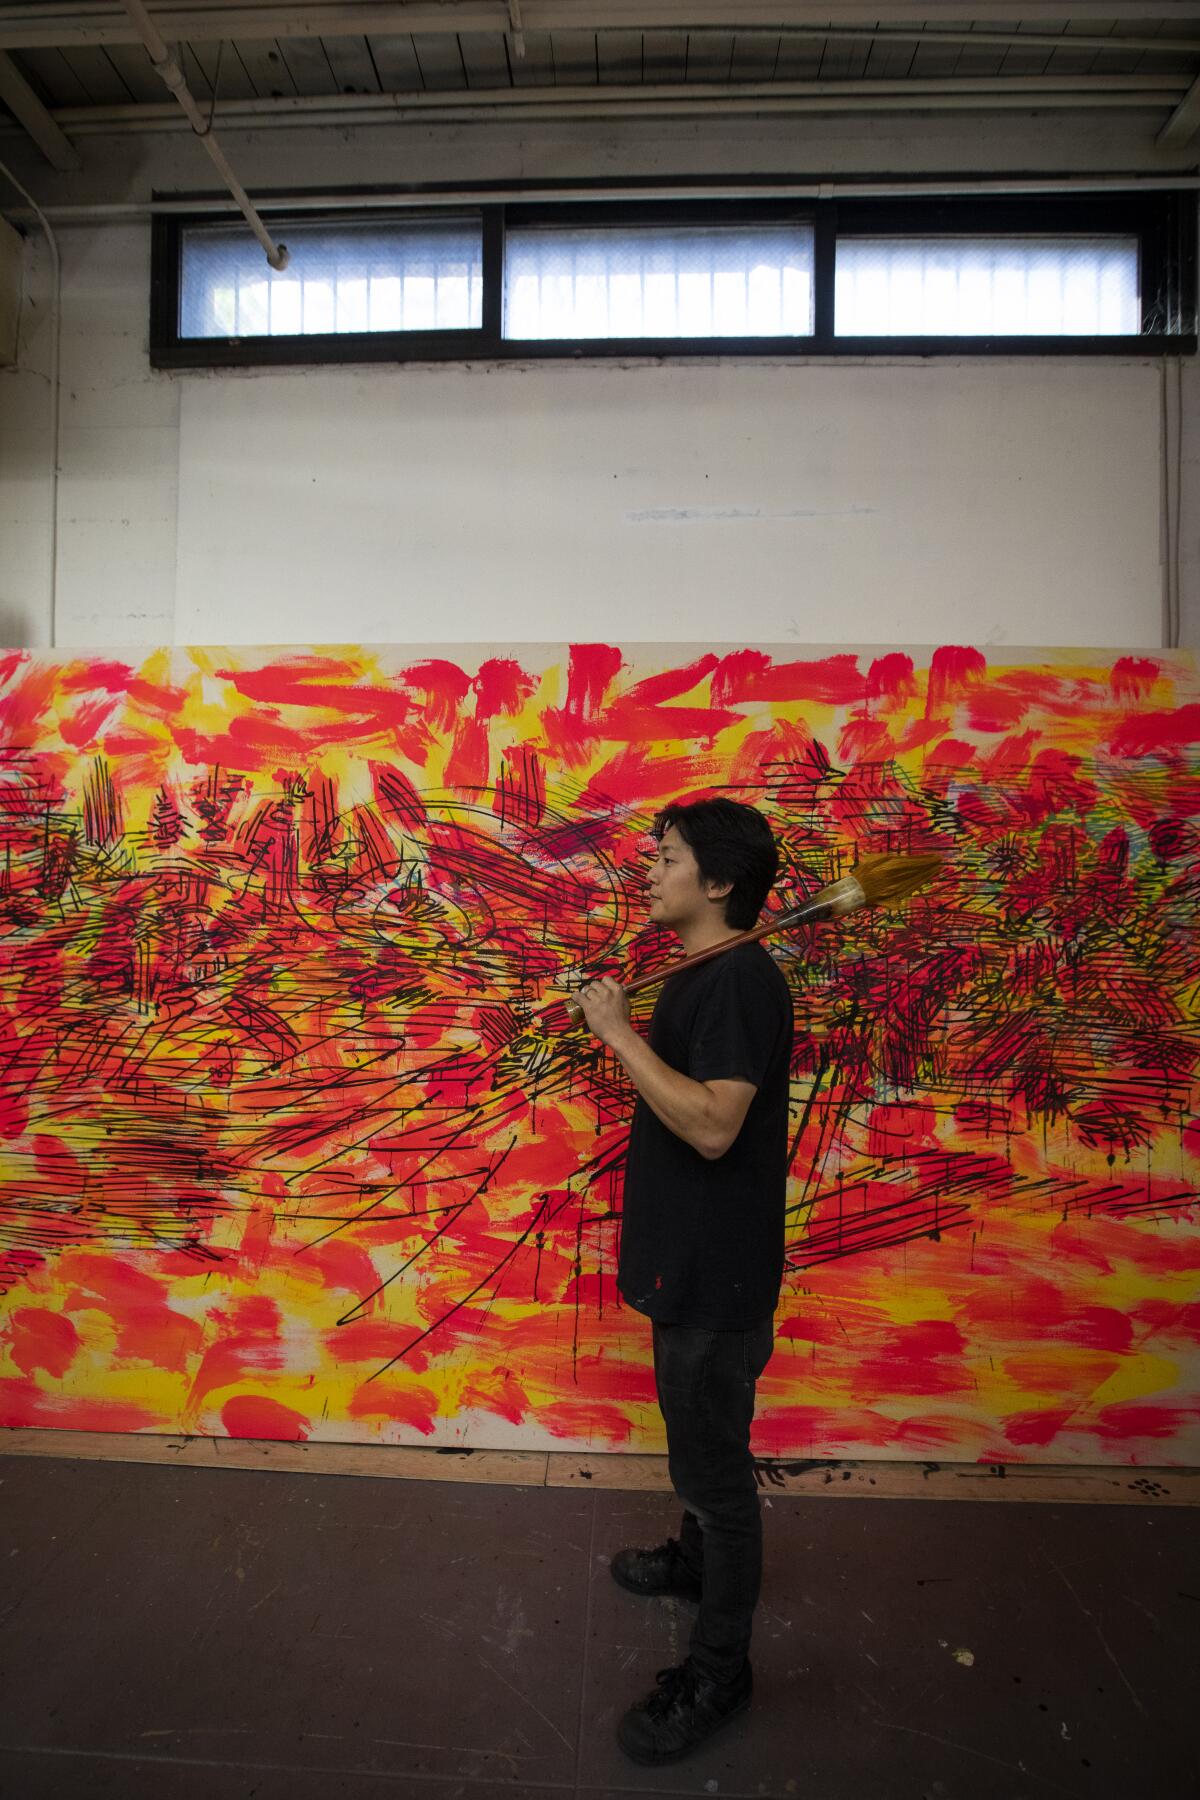 Artist Duke Choi, 30, in his space at Santa Fe Art Colony in Los Angeles.